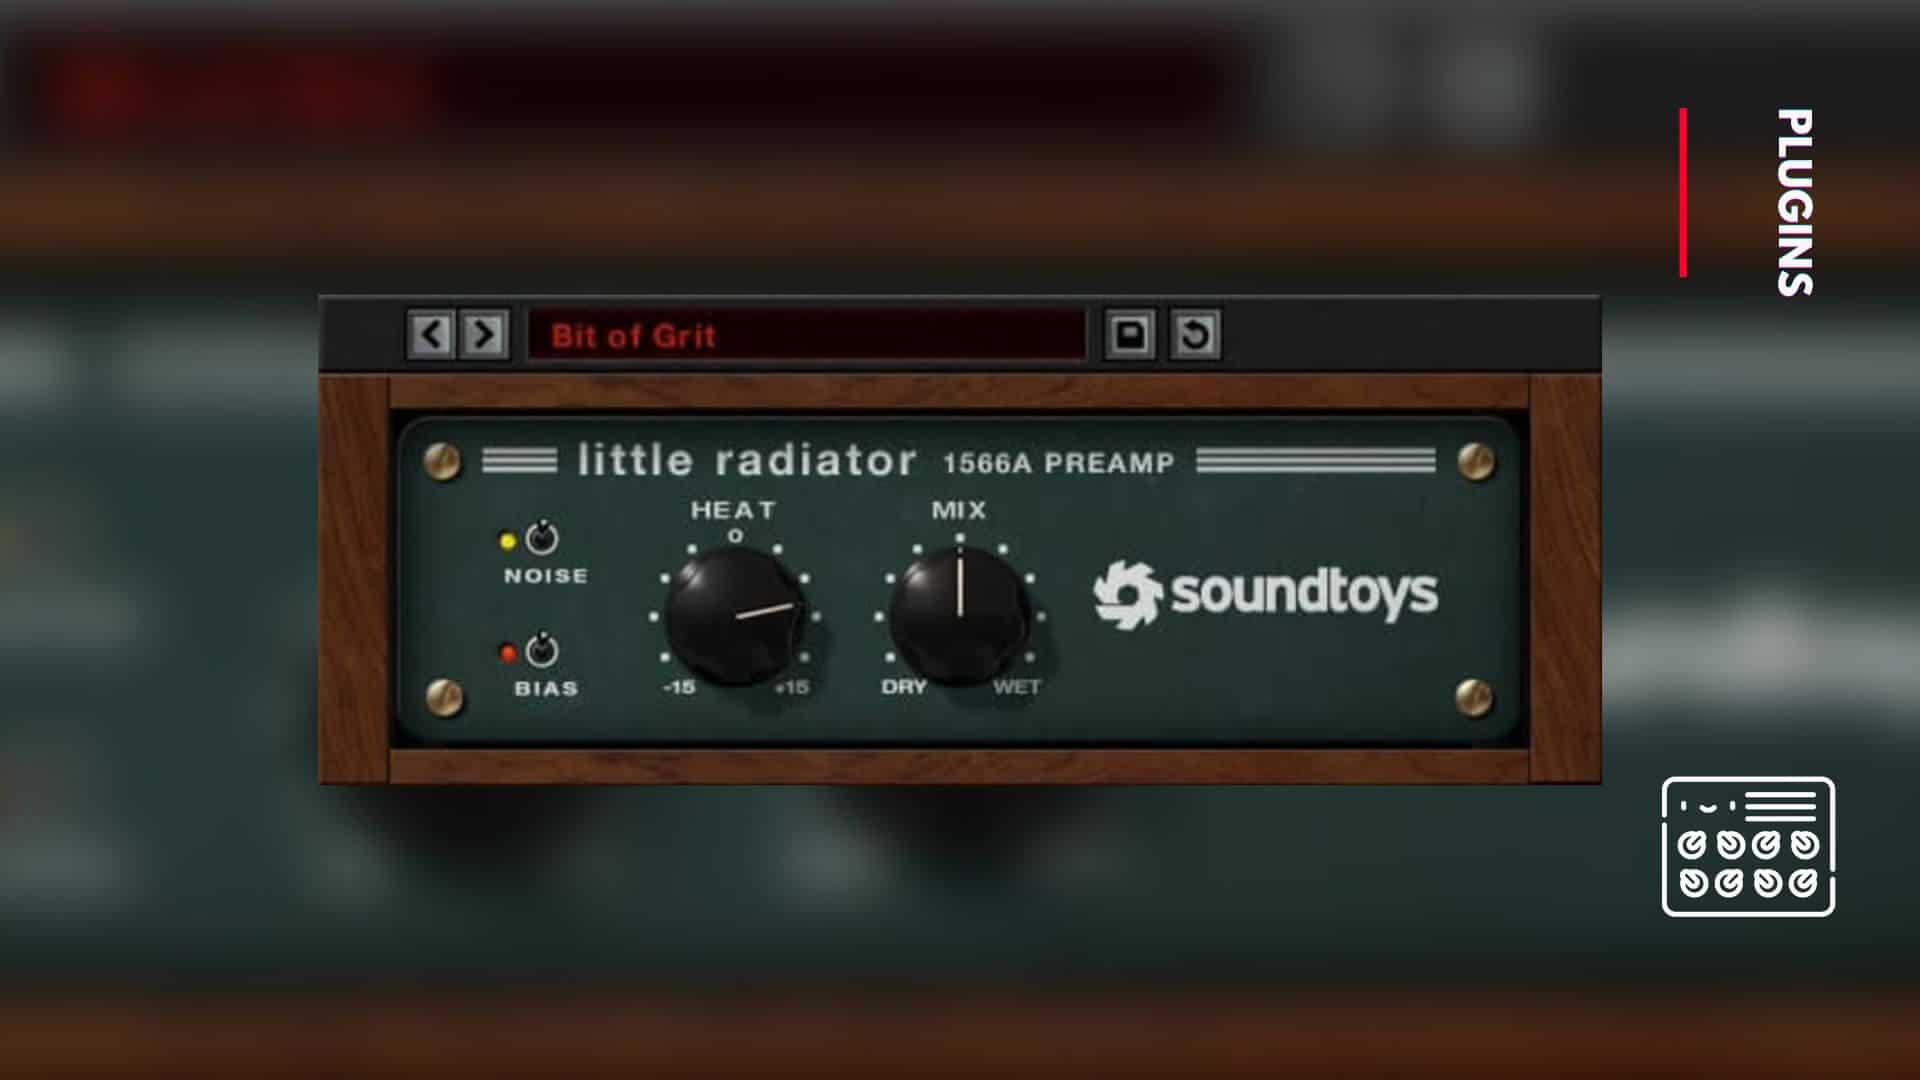 Little Radiator by Soundtoys currently available for FREE